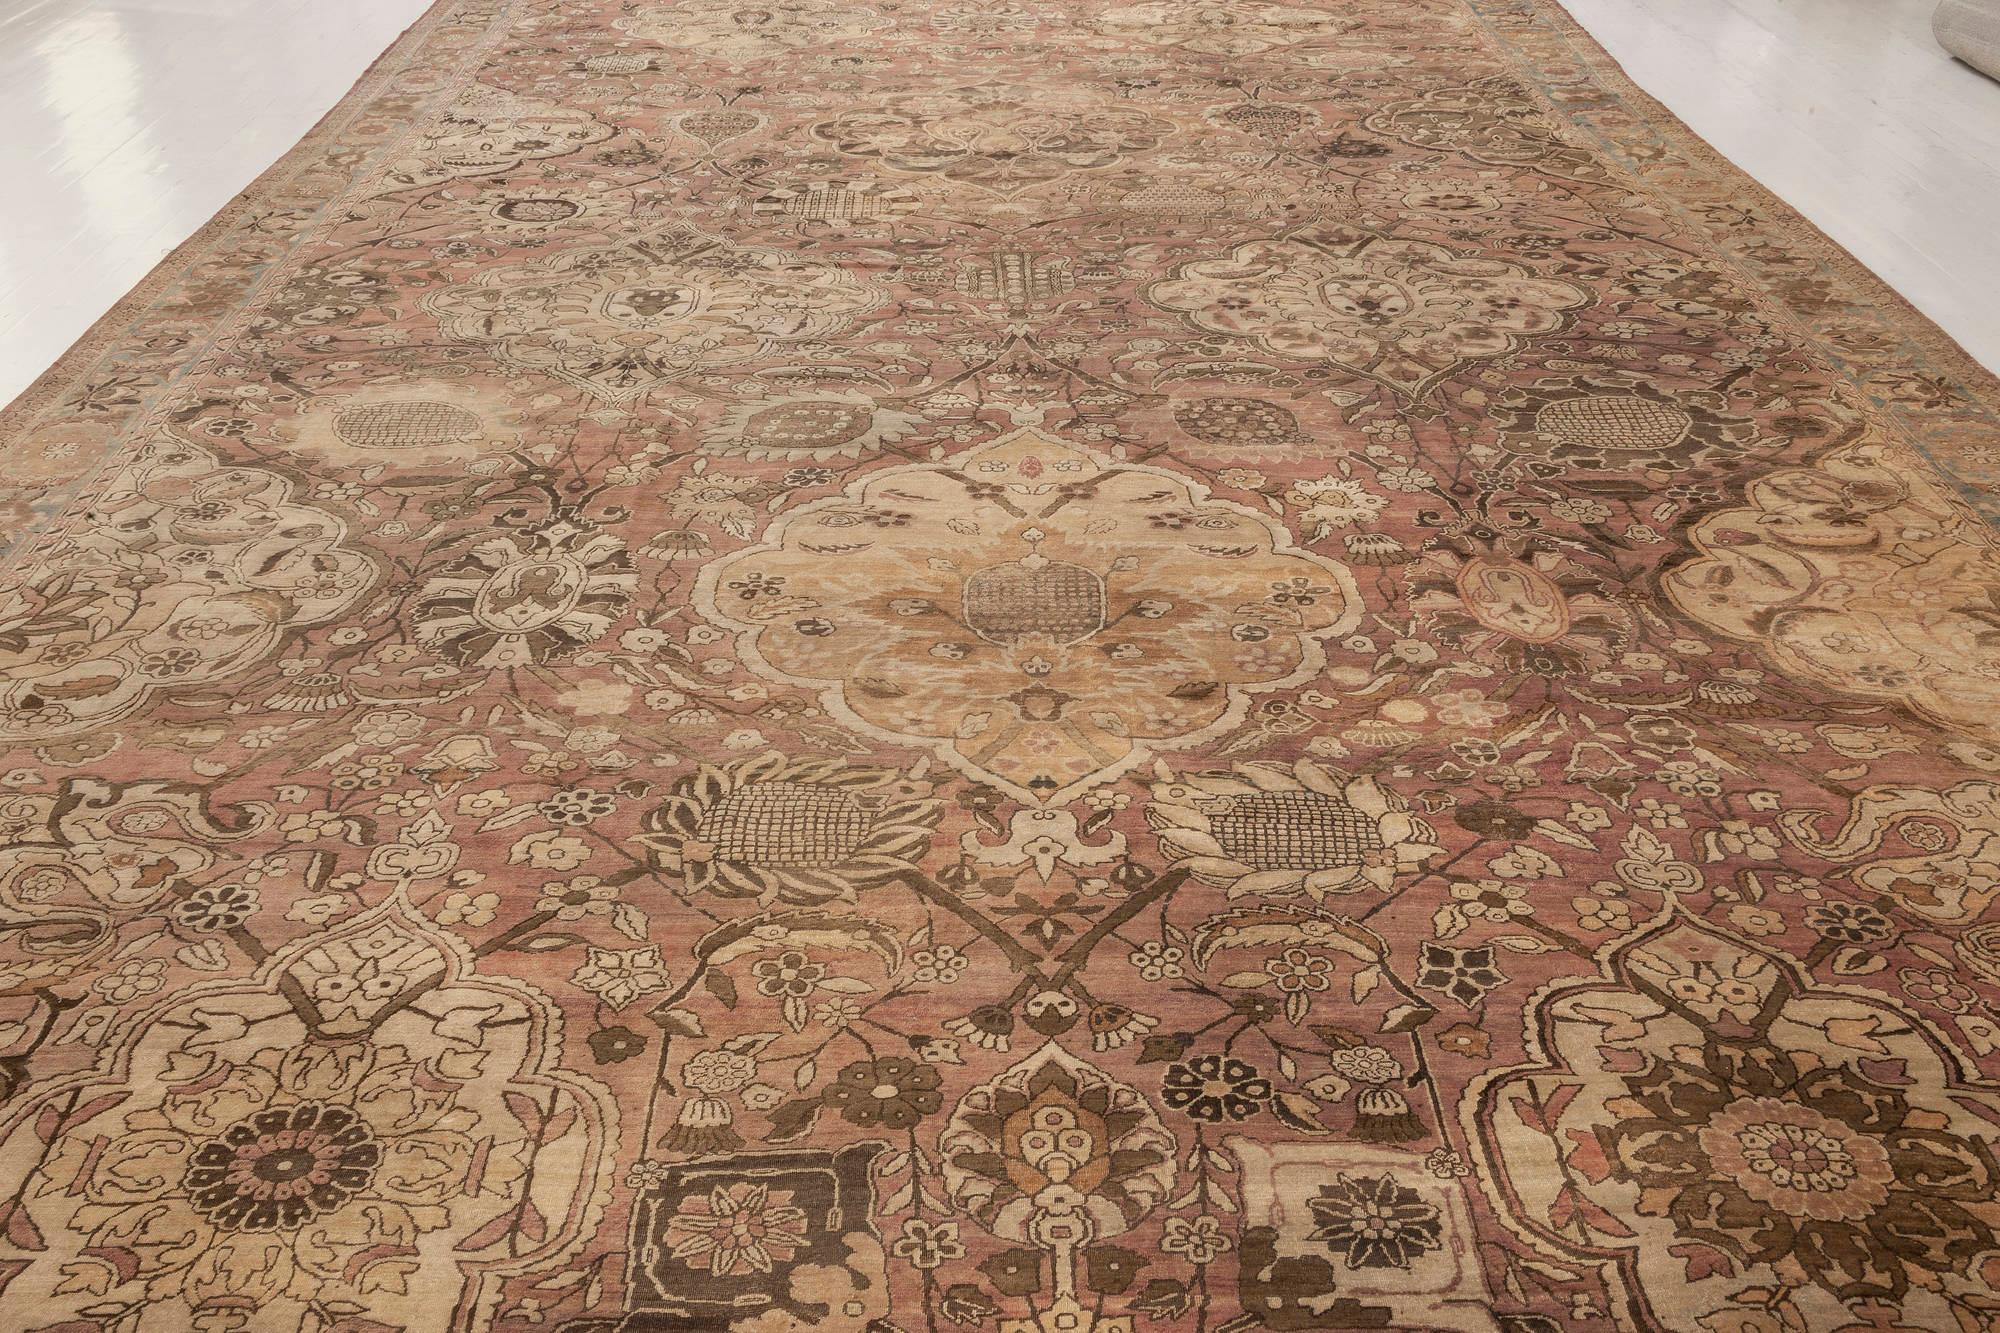 Early 20th century Kirman rug in beige, blue, brown, pink
Size: 11'7